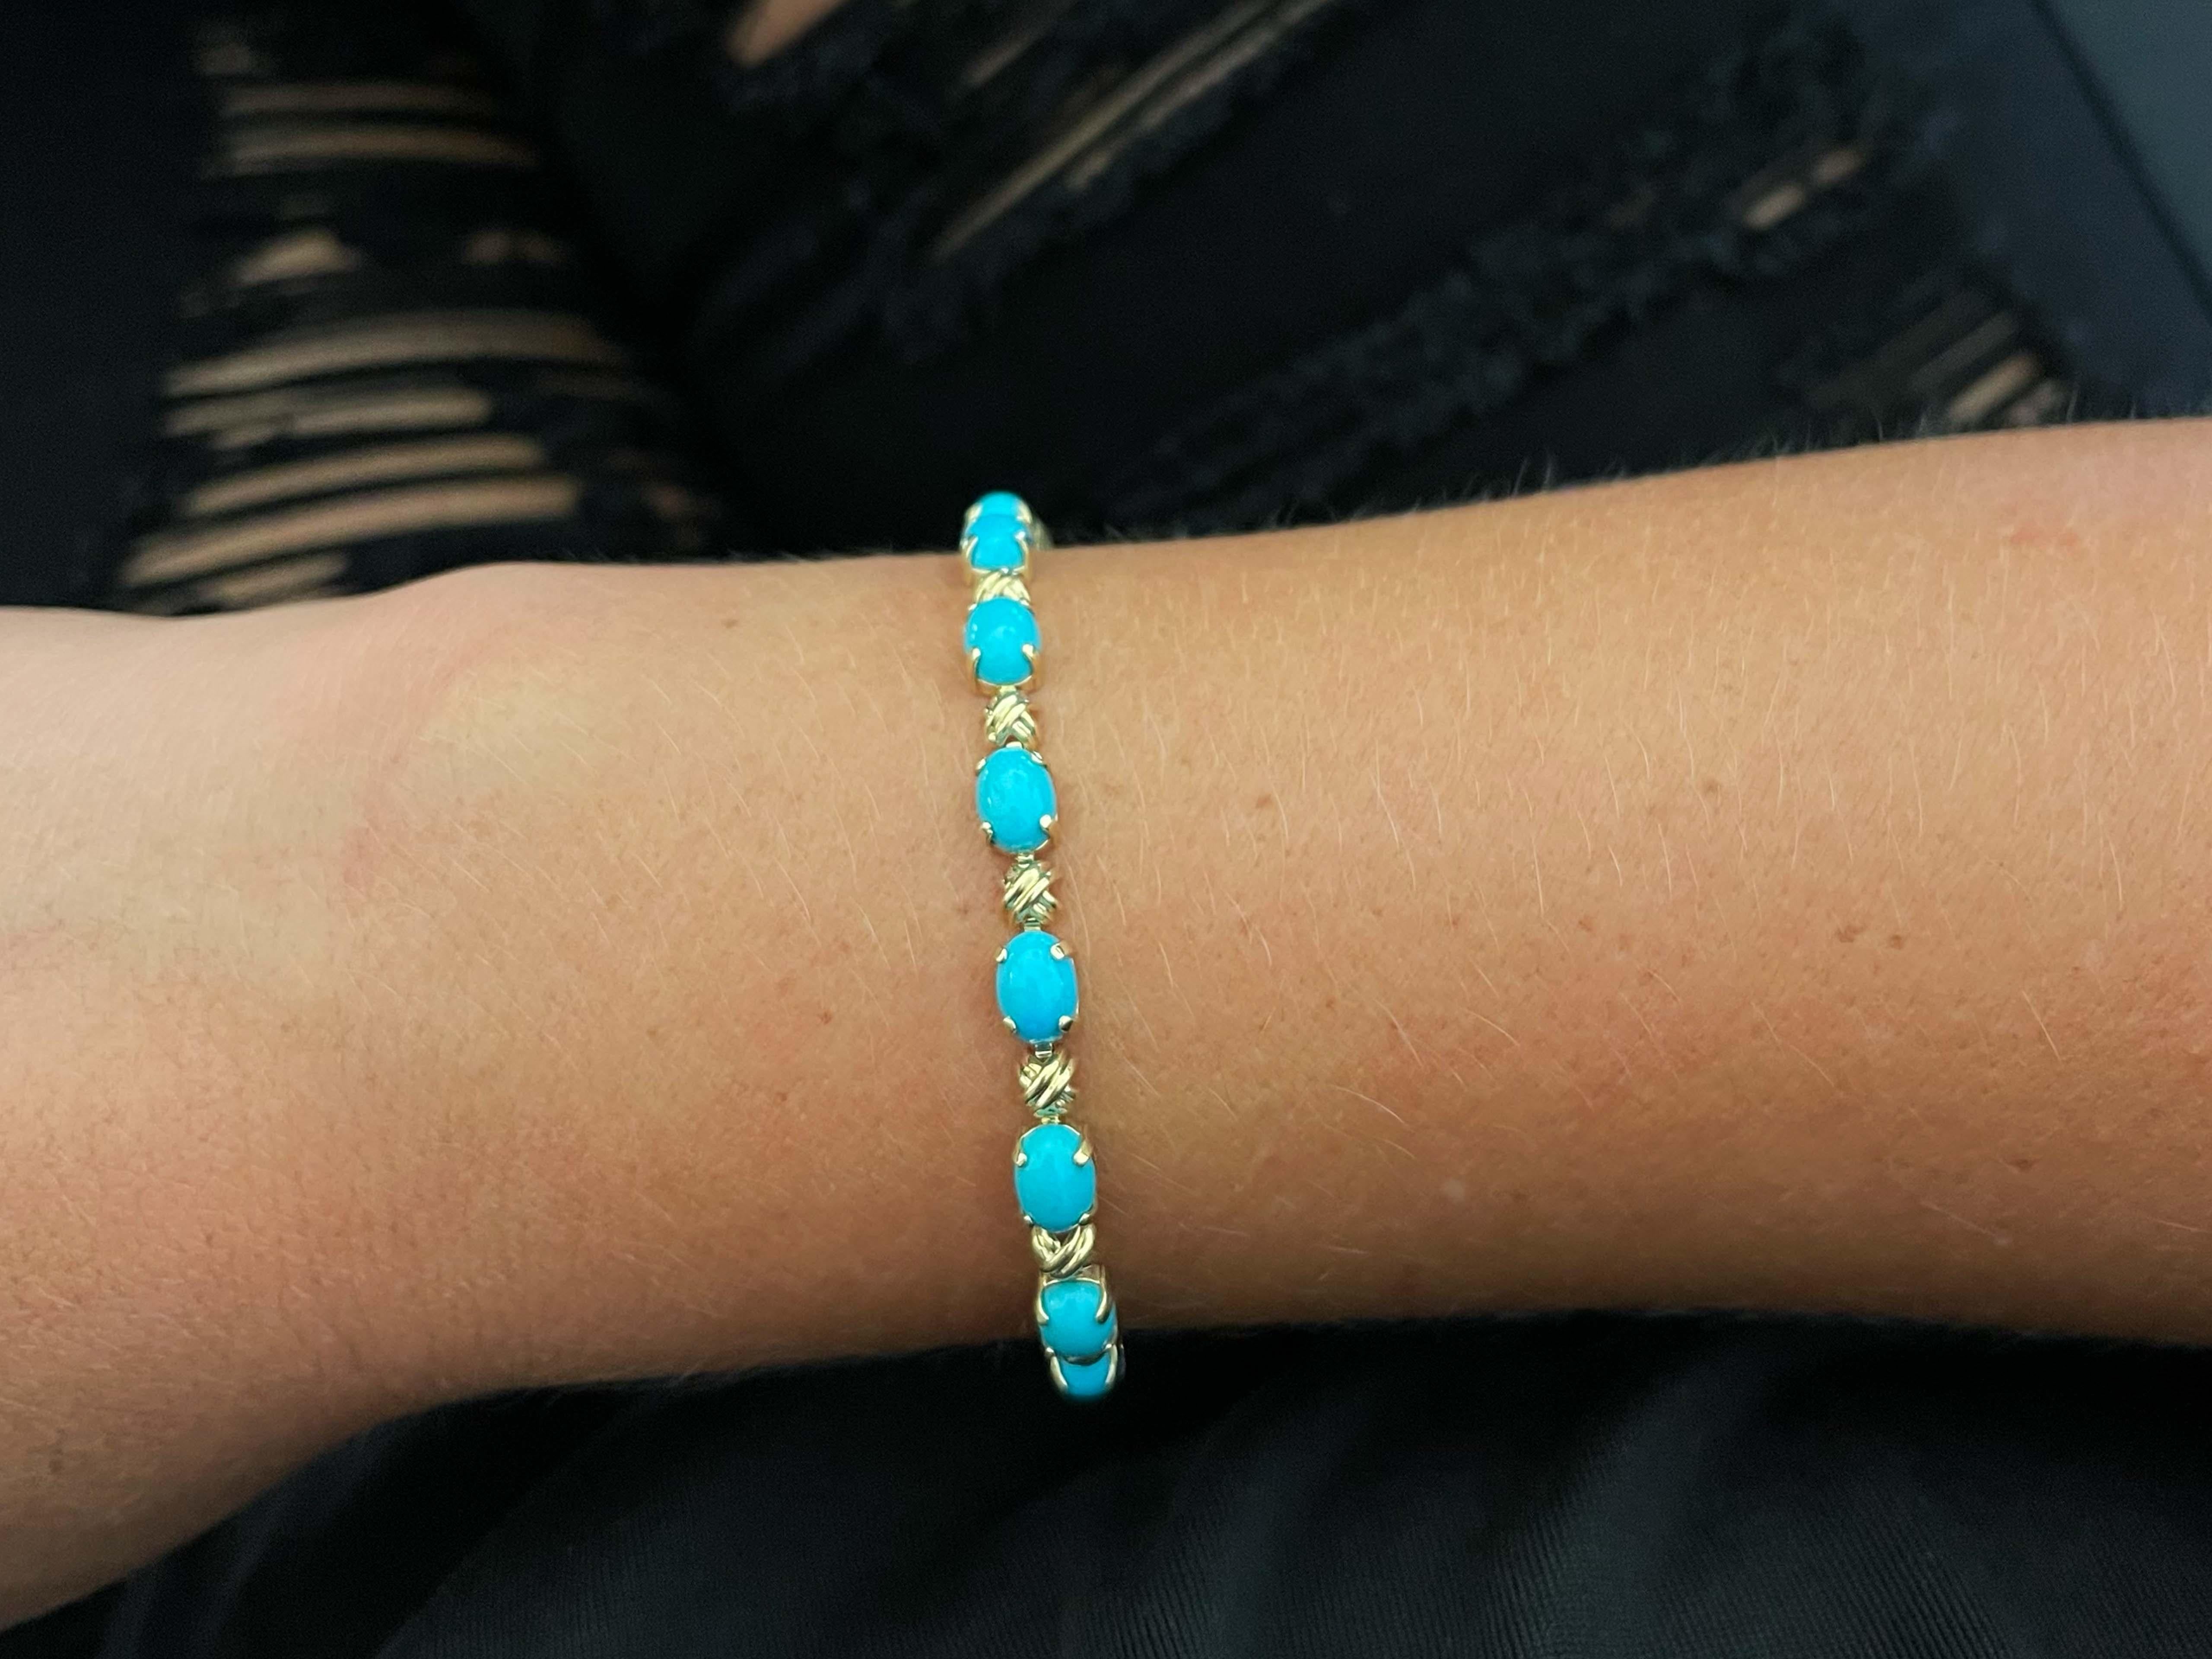 Bracelet Specification:

Total Weight: 10 Grams

Turquoise Measurement: 7.04 x 5.15 x 3.20 mm

Bracelet Length: 7.6 inches

Turquoise Count: 17 cabochon turquoise
Condition: Preowned, excellent

Stamped: 